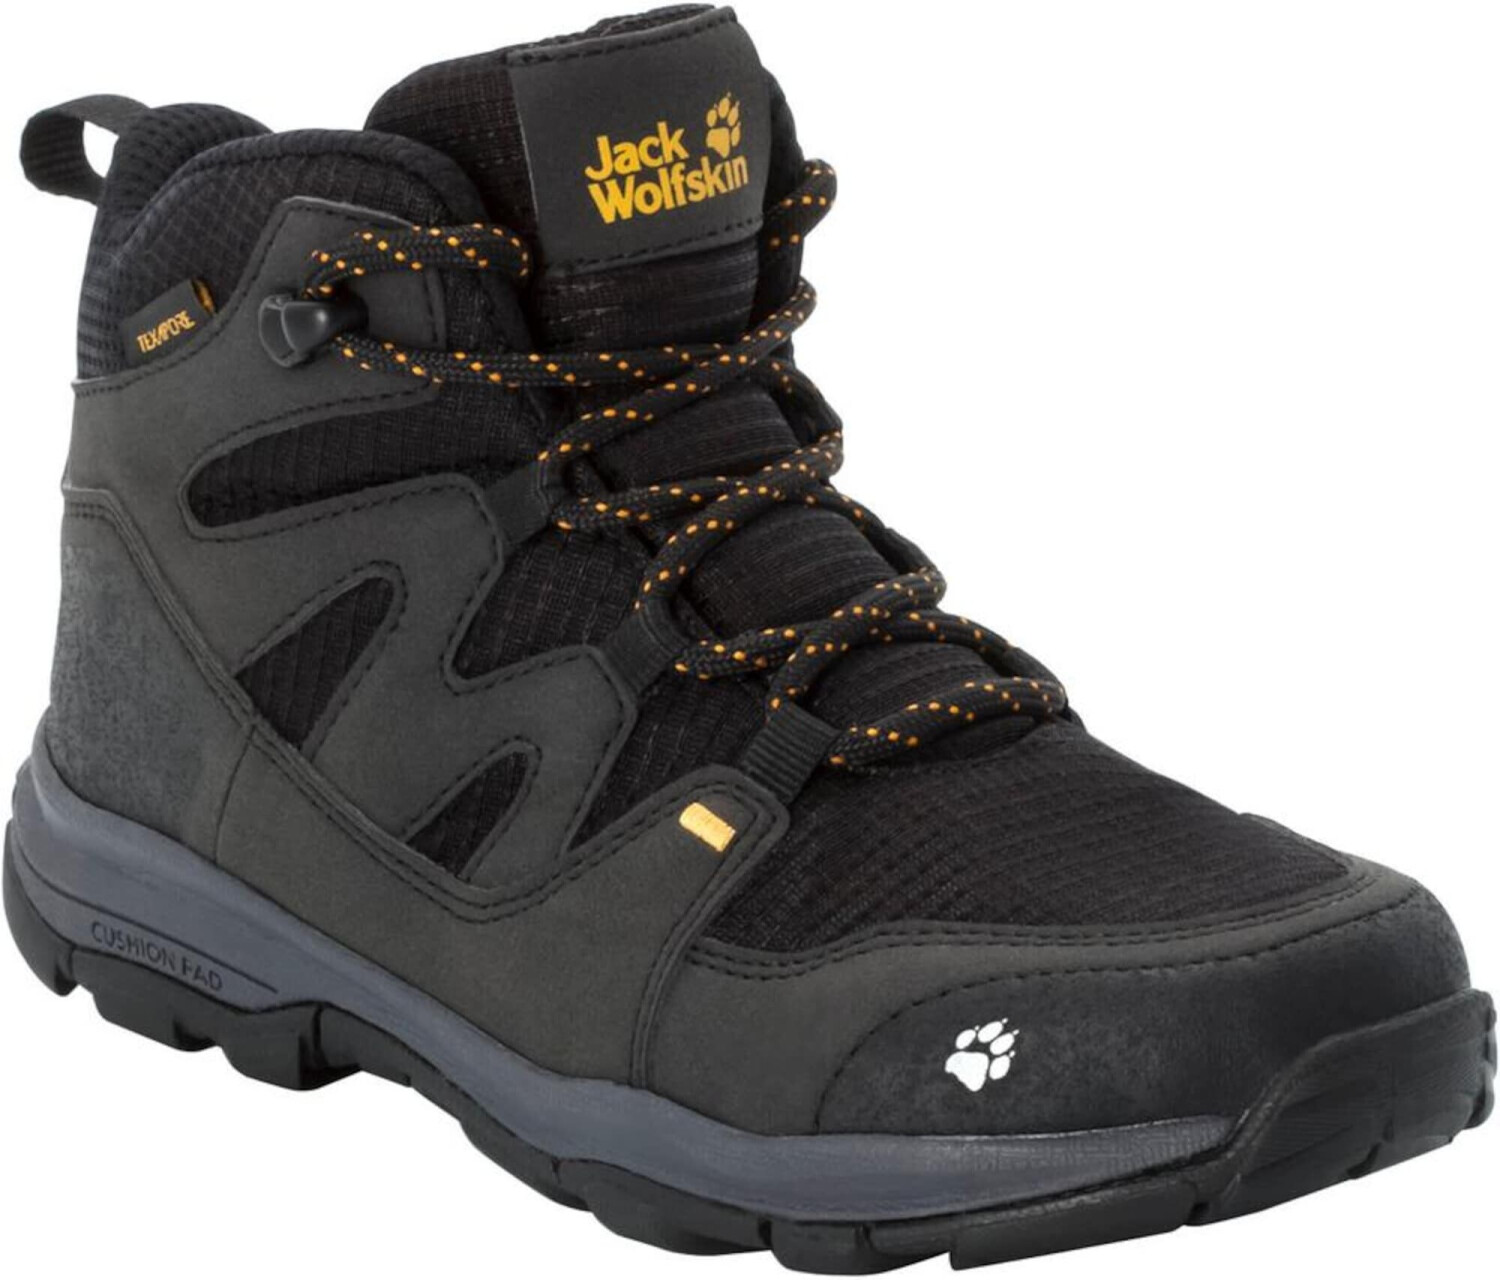 Buy Jack Wolfskin MTN Attack 3 Texapore black/burly yellow xt from £40. ...